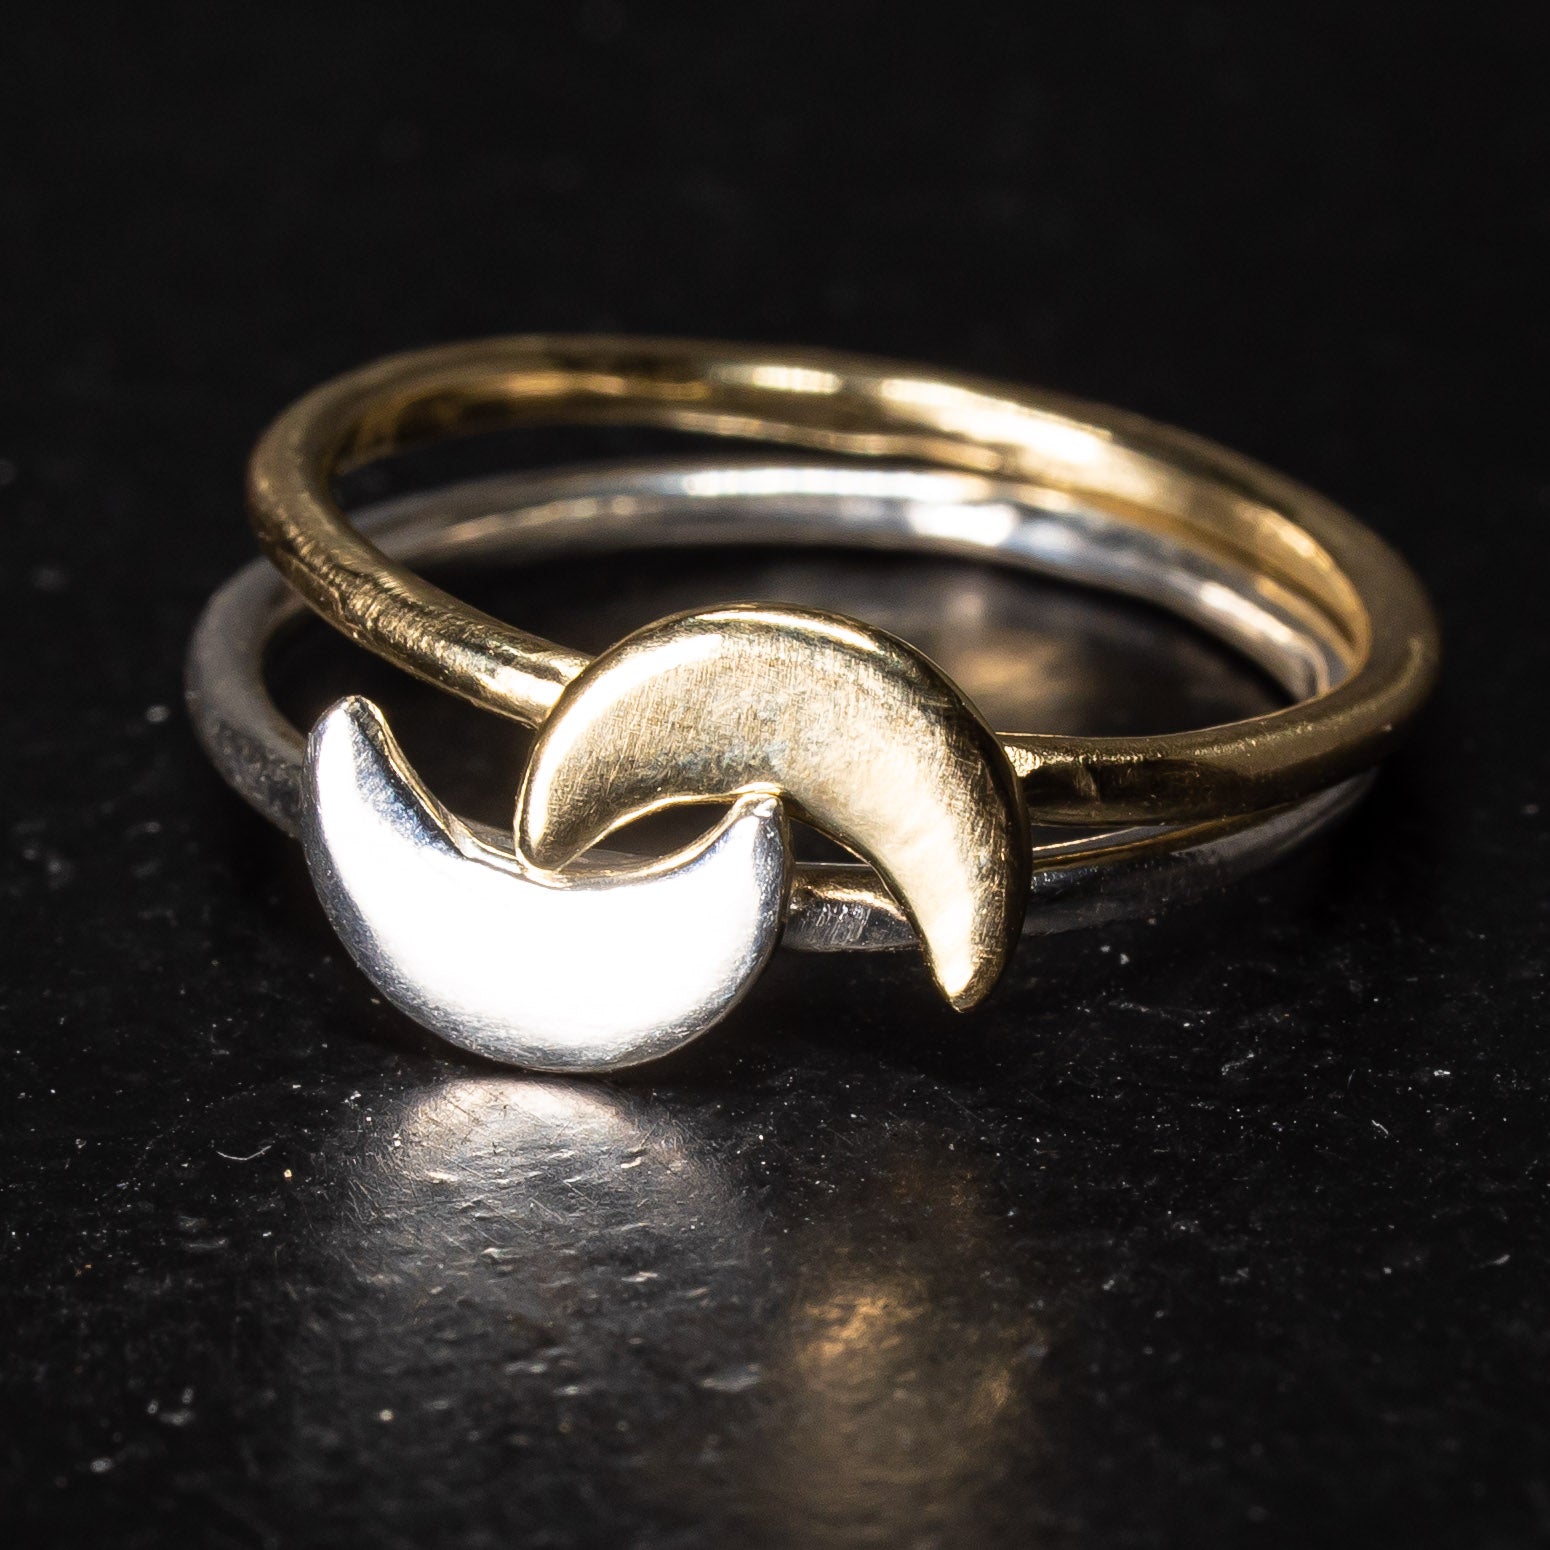 Two crescent moon rings stacked on each other one in gold and one in silver